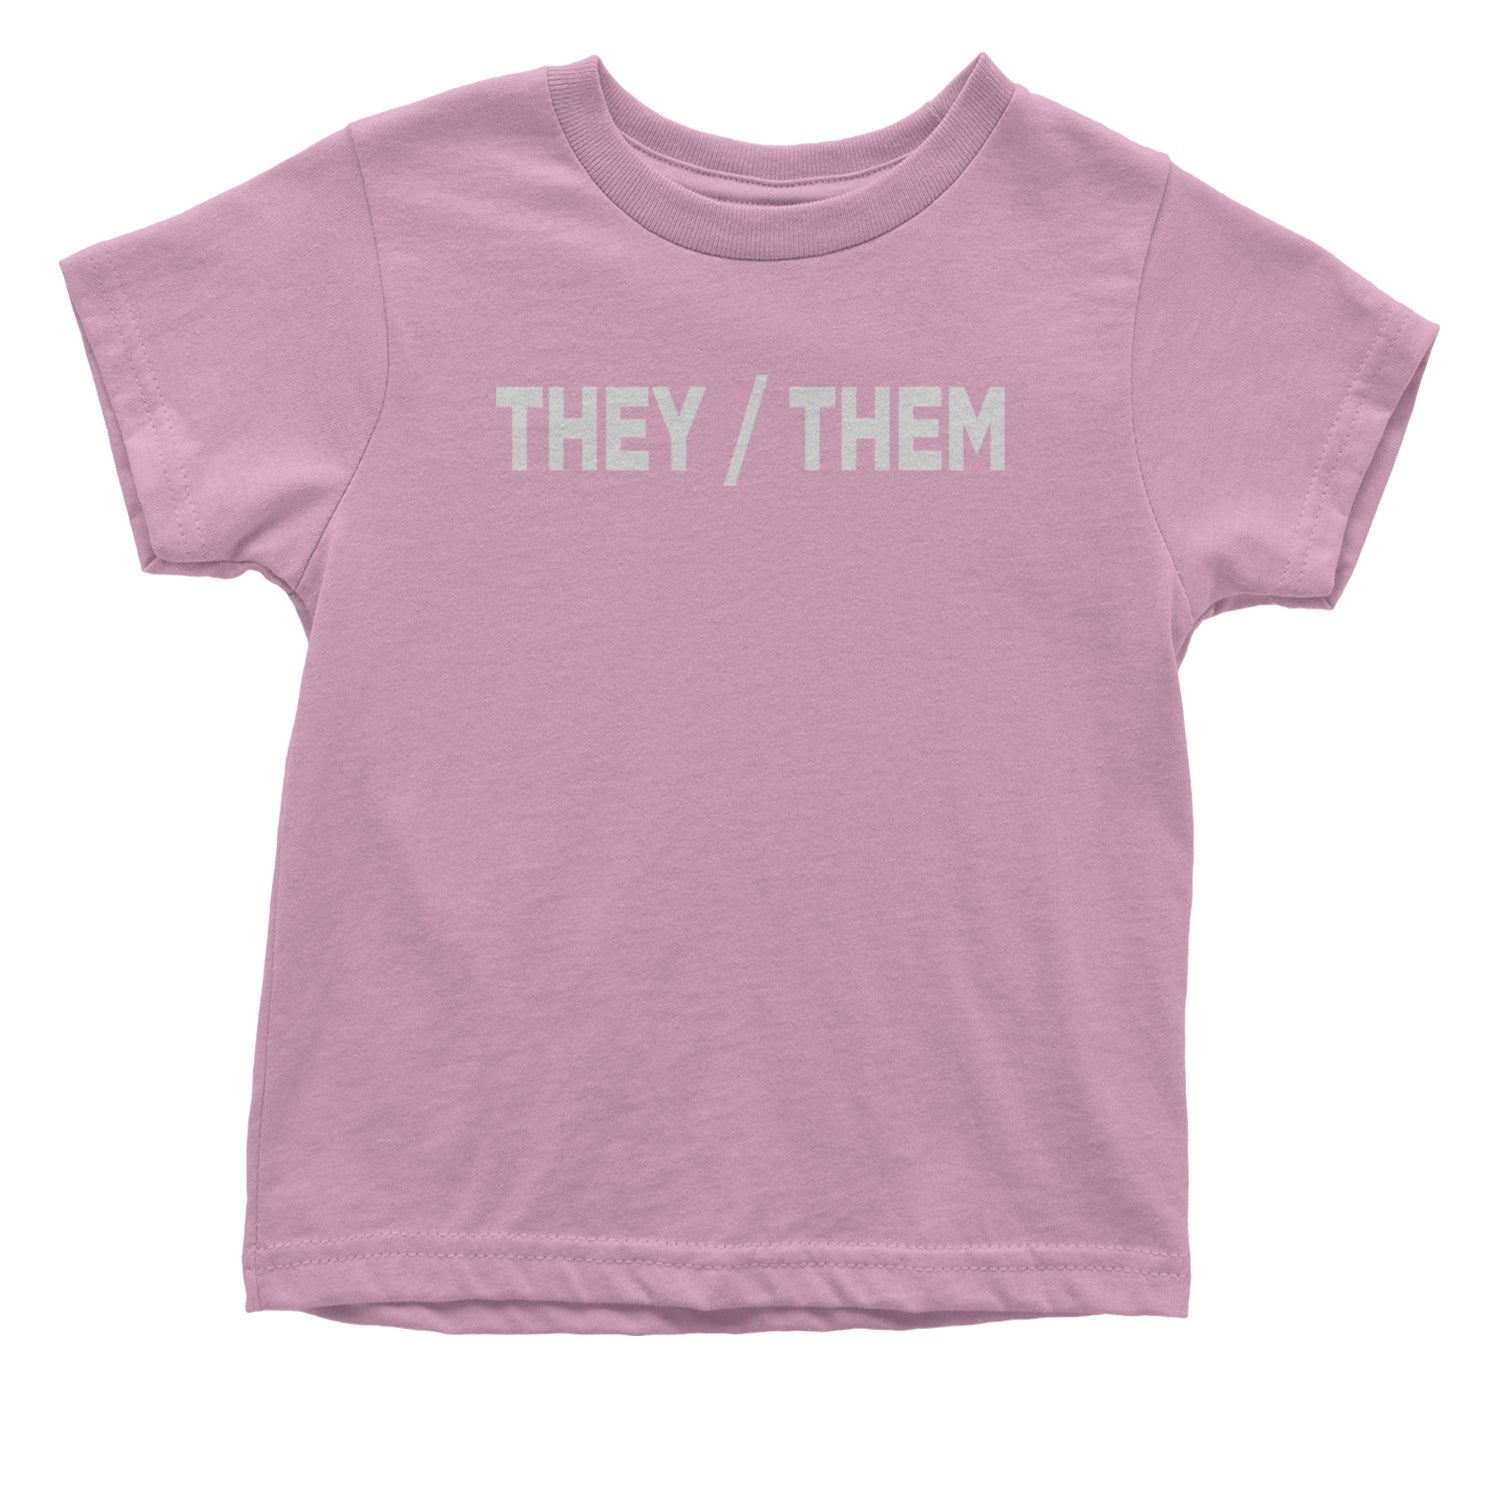 They Them Gender Pronouns Diversity and Inclusion Infant One-Piece Romper Bodysuit and Toddler T-shirt binary, civil, gay, he, her, him, nonbinary, pride, rights, she, them, they by Expression Tees